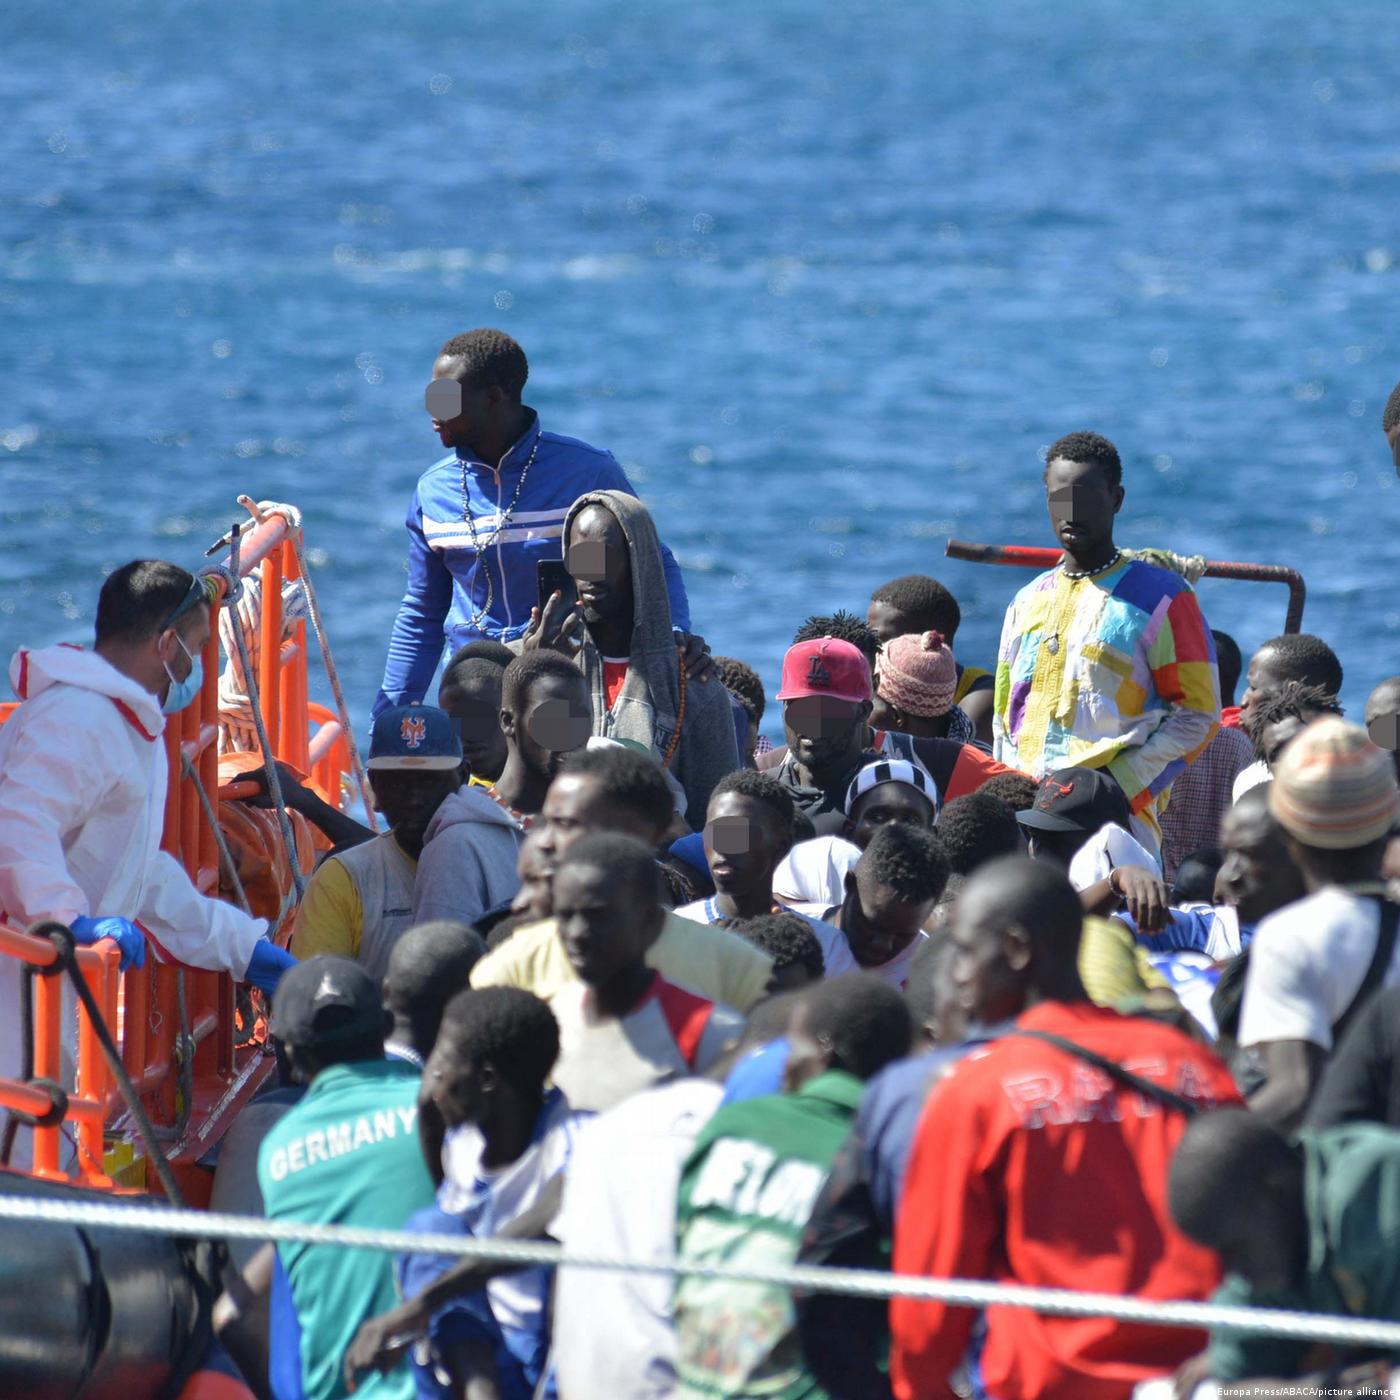 Record number of Africans flee to Spain's Canary Islands